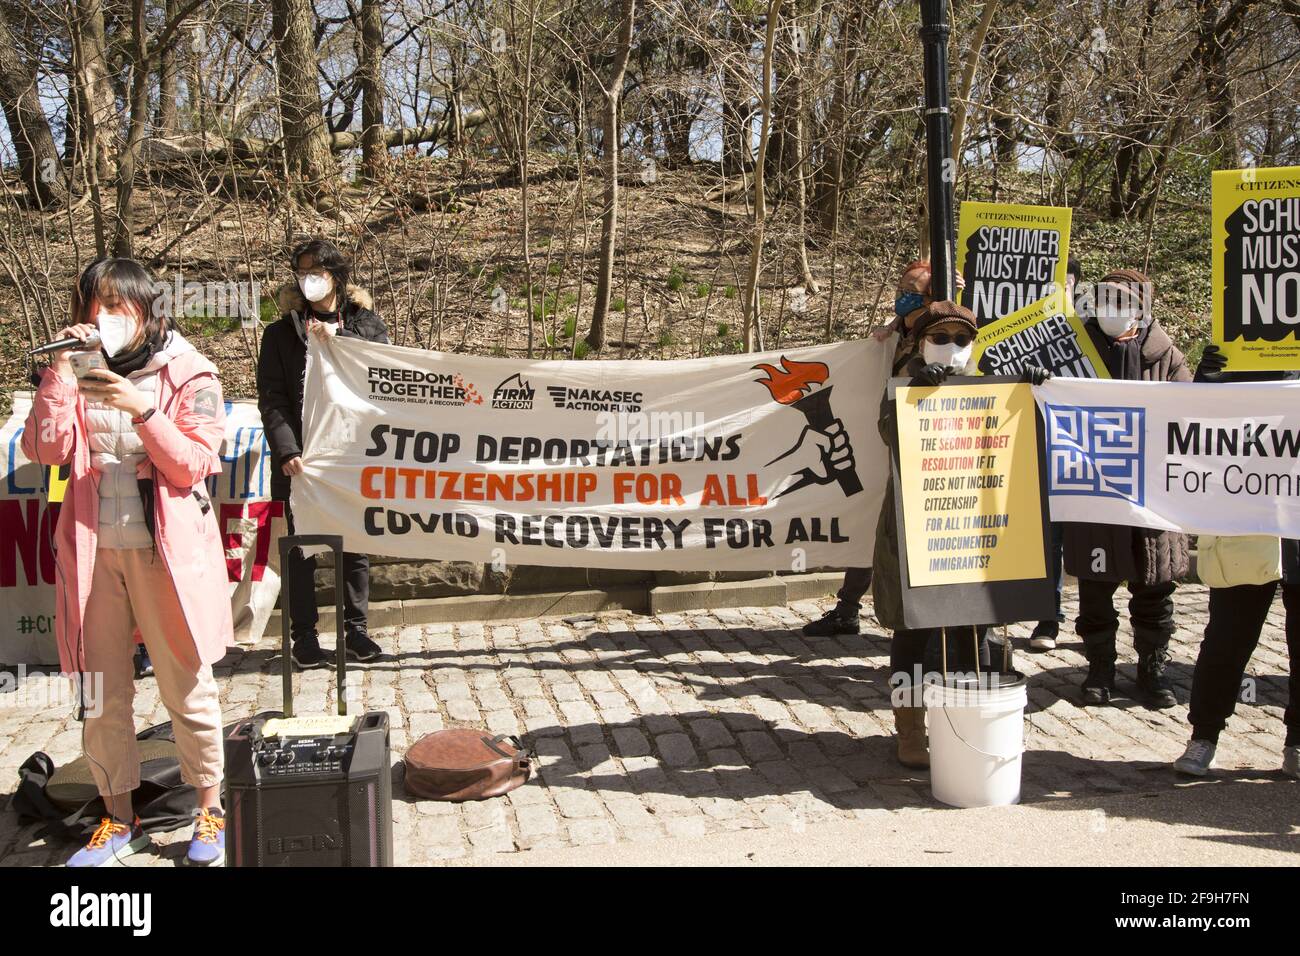 “NAKASEC is a bold leading organization in supporting justice for Asian Americans. Members demonstrate outside Senator Chuck Shumers' home in Brooklyn to help Asians and stop deportations. Stock Photo